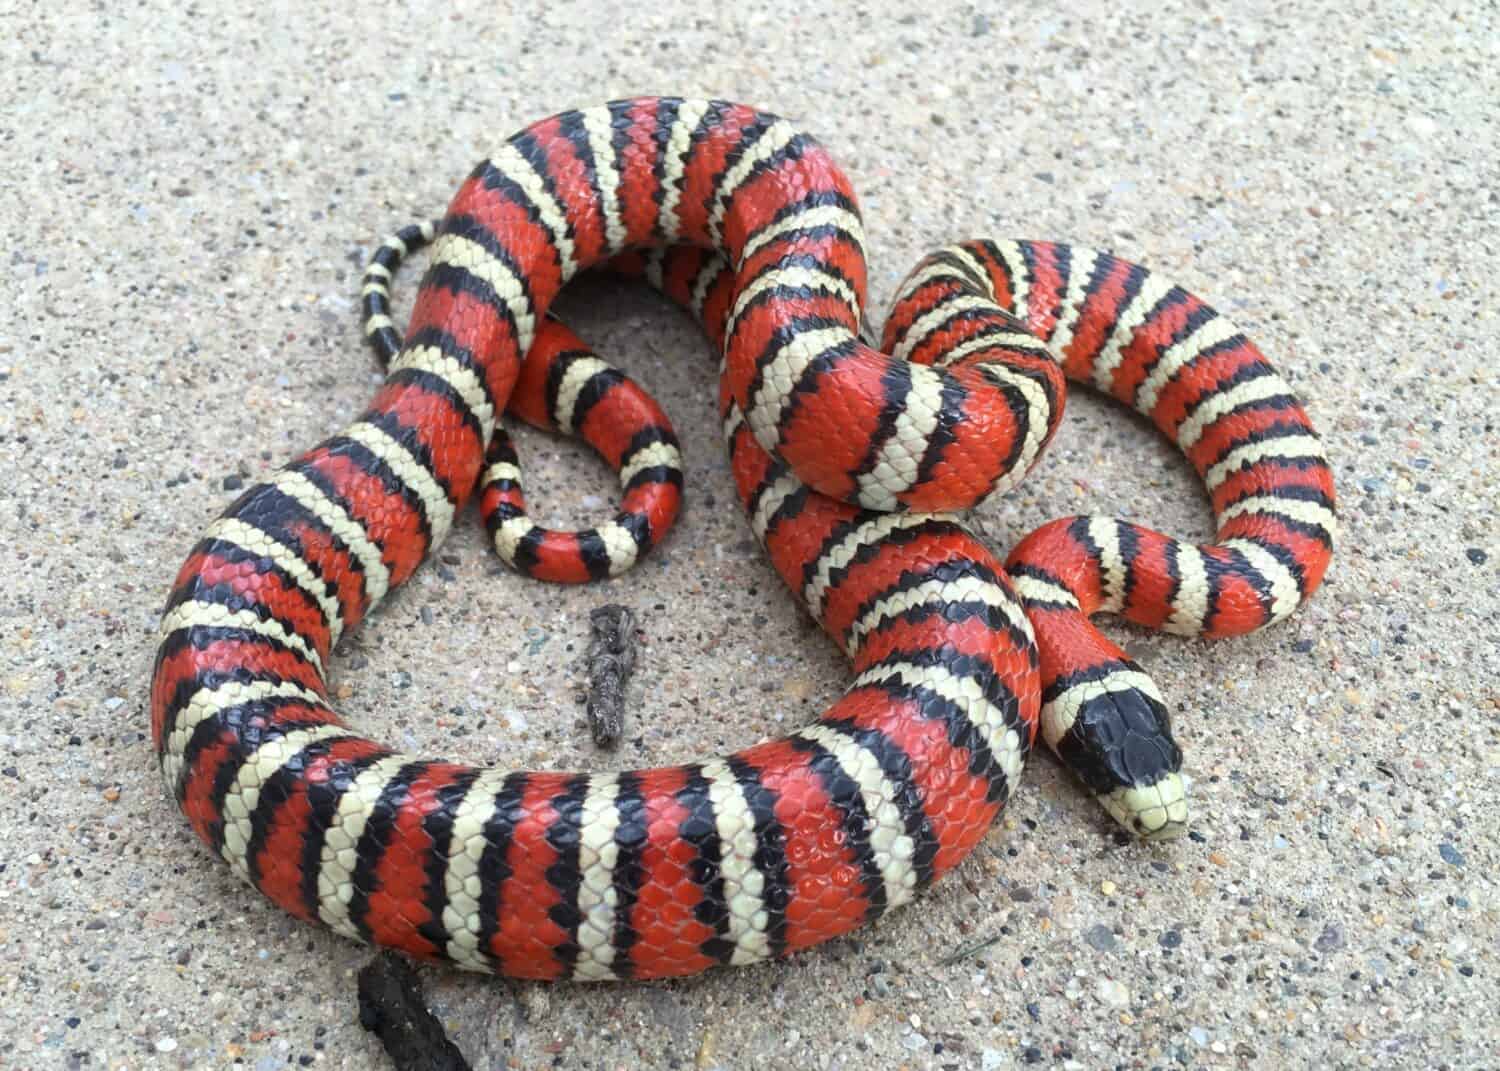 How to Identify Black-and-Red-Banded Snakes